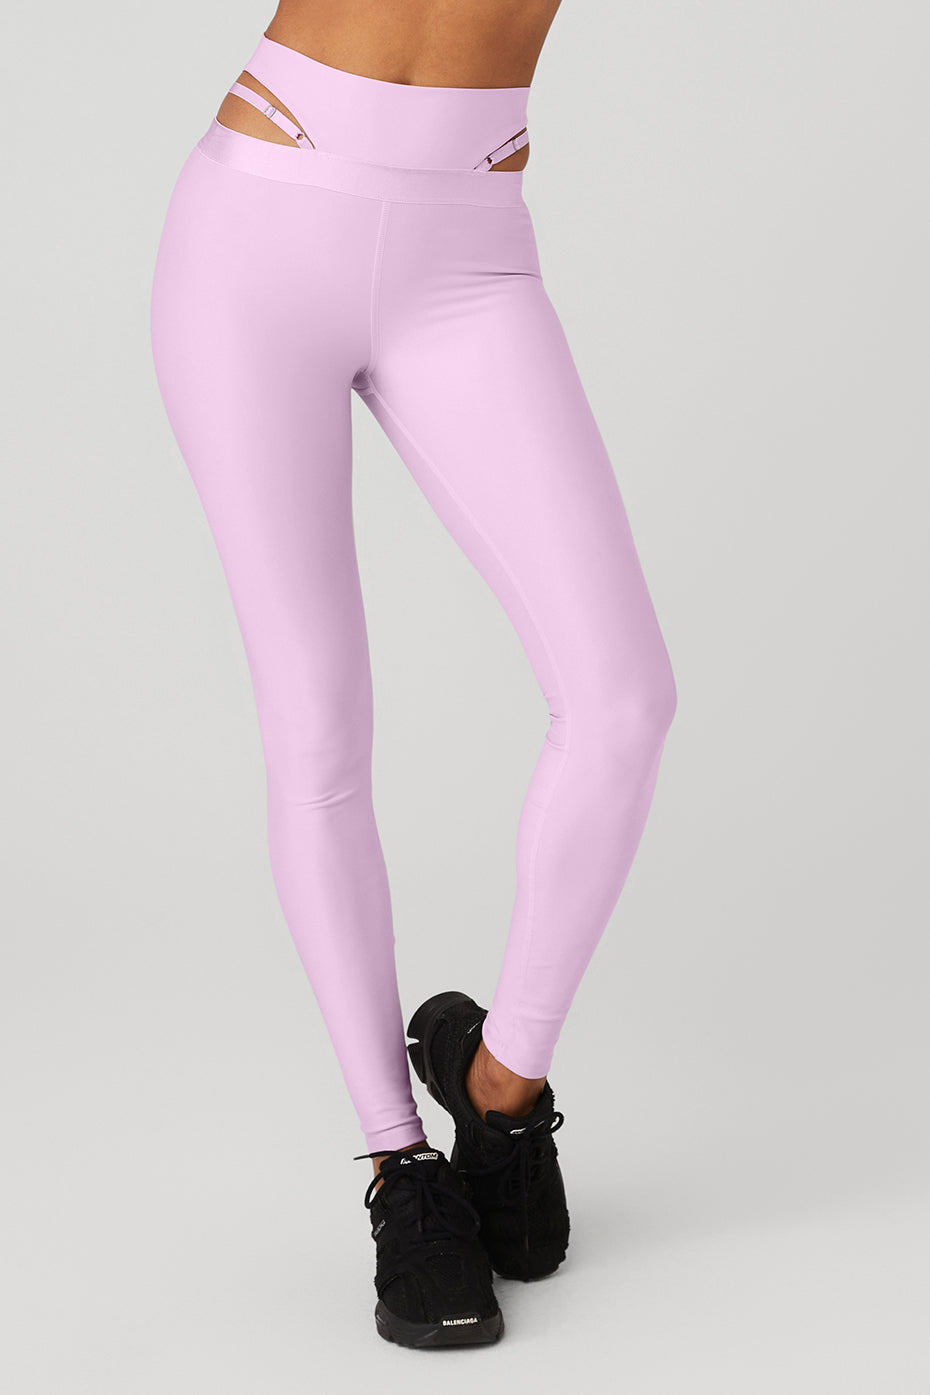 ALO YOGA Airlift High-Rise Leggings in Pink